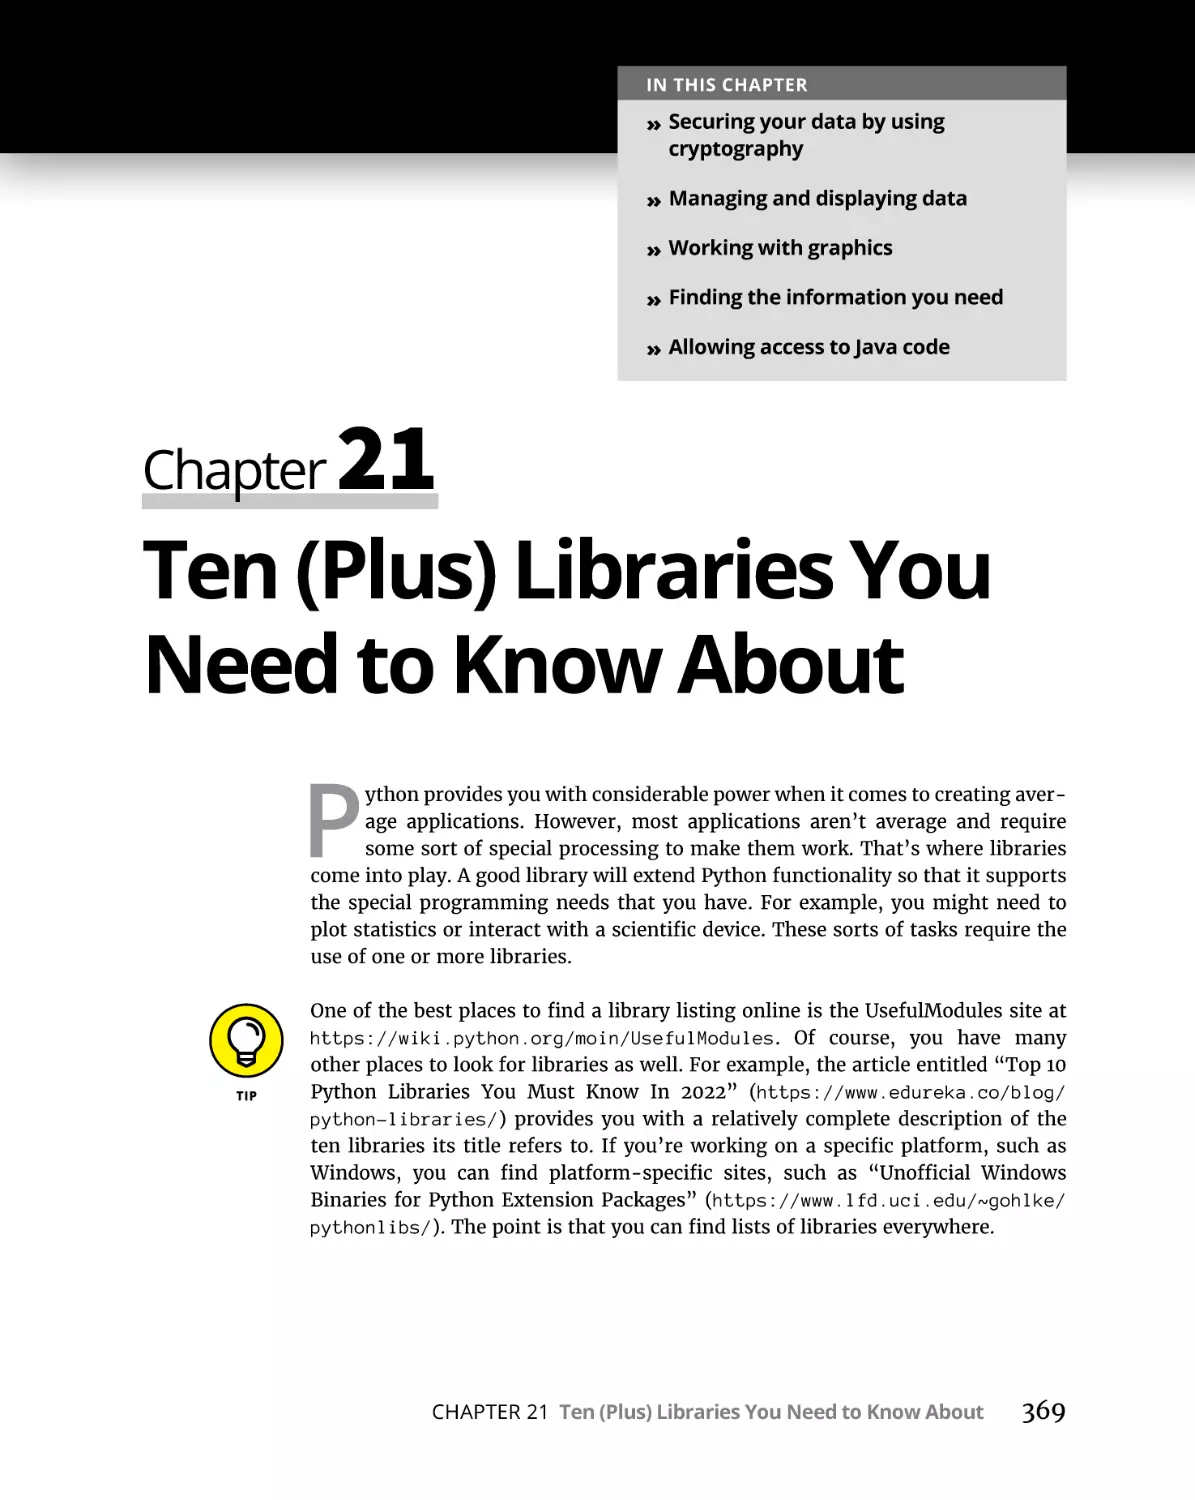 Chapter 21 Ten (Plus) Libraries You Need to Know About